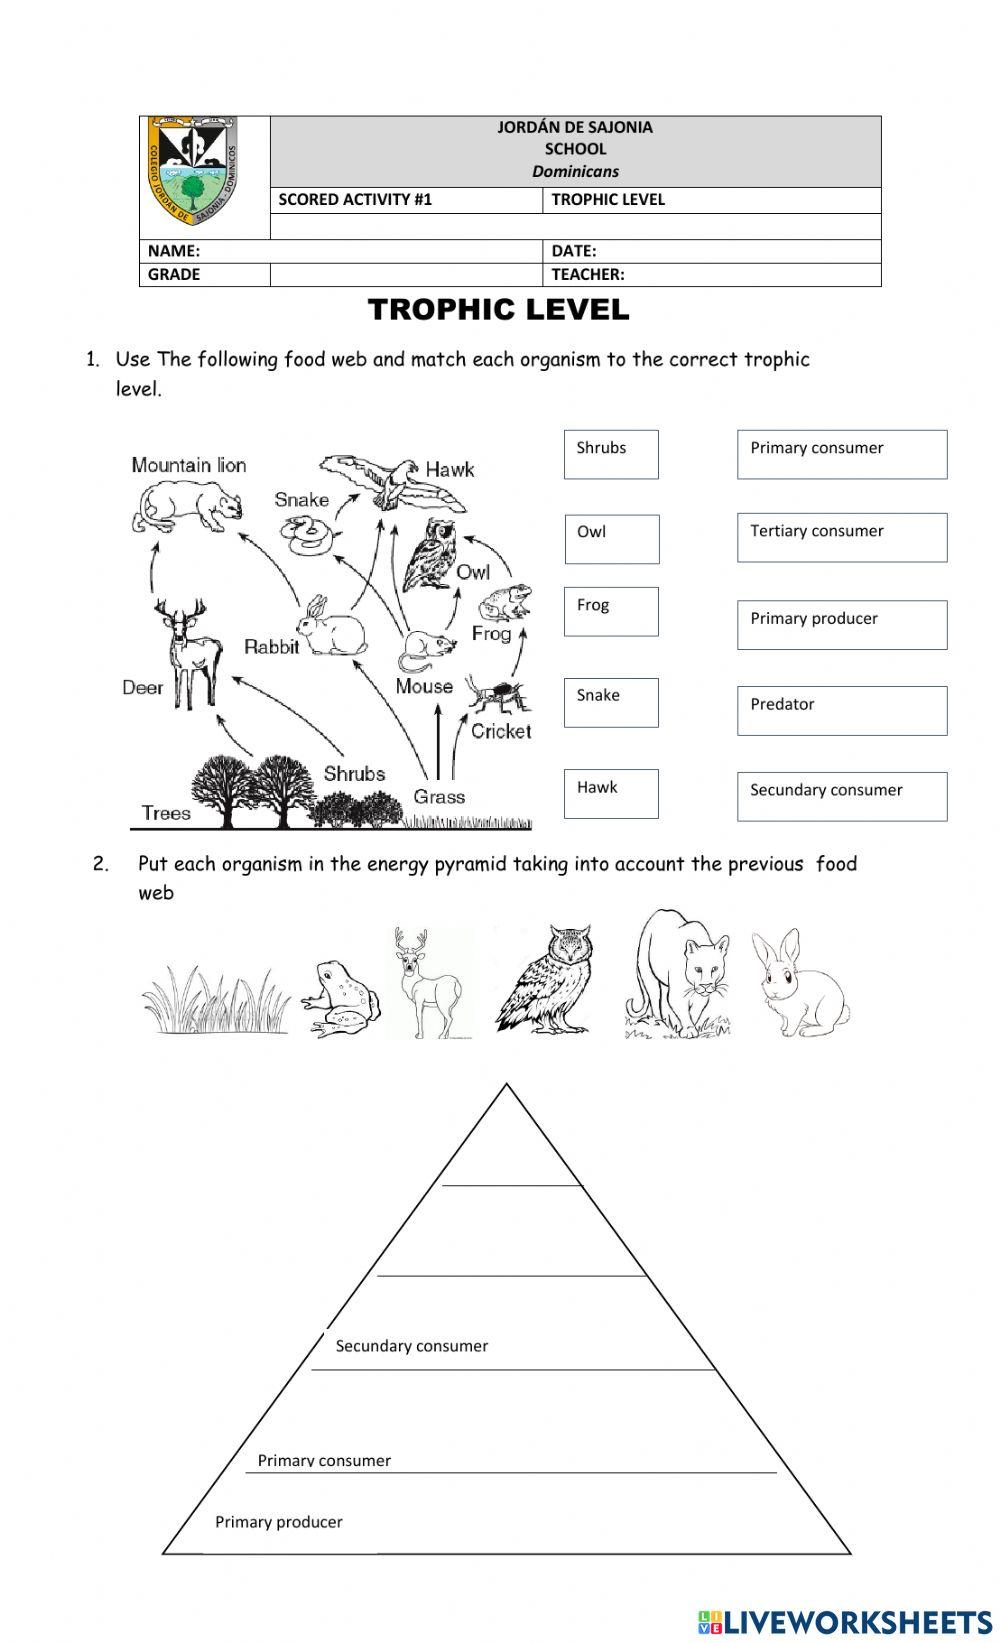 Food web and trophic level